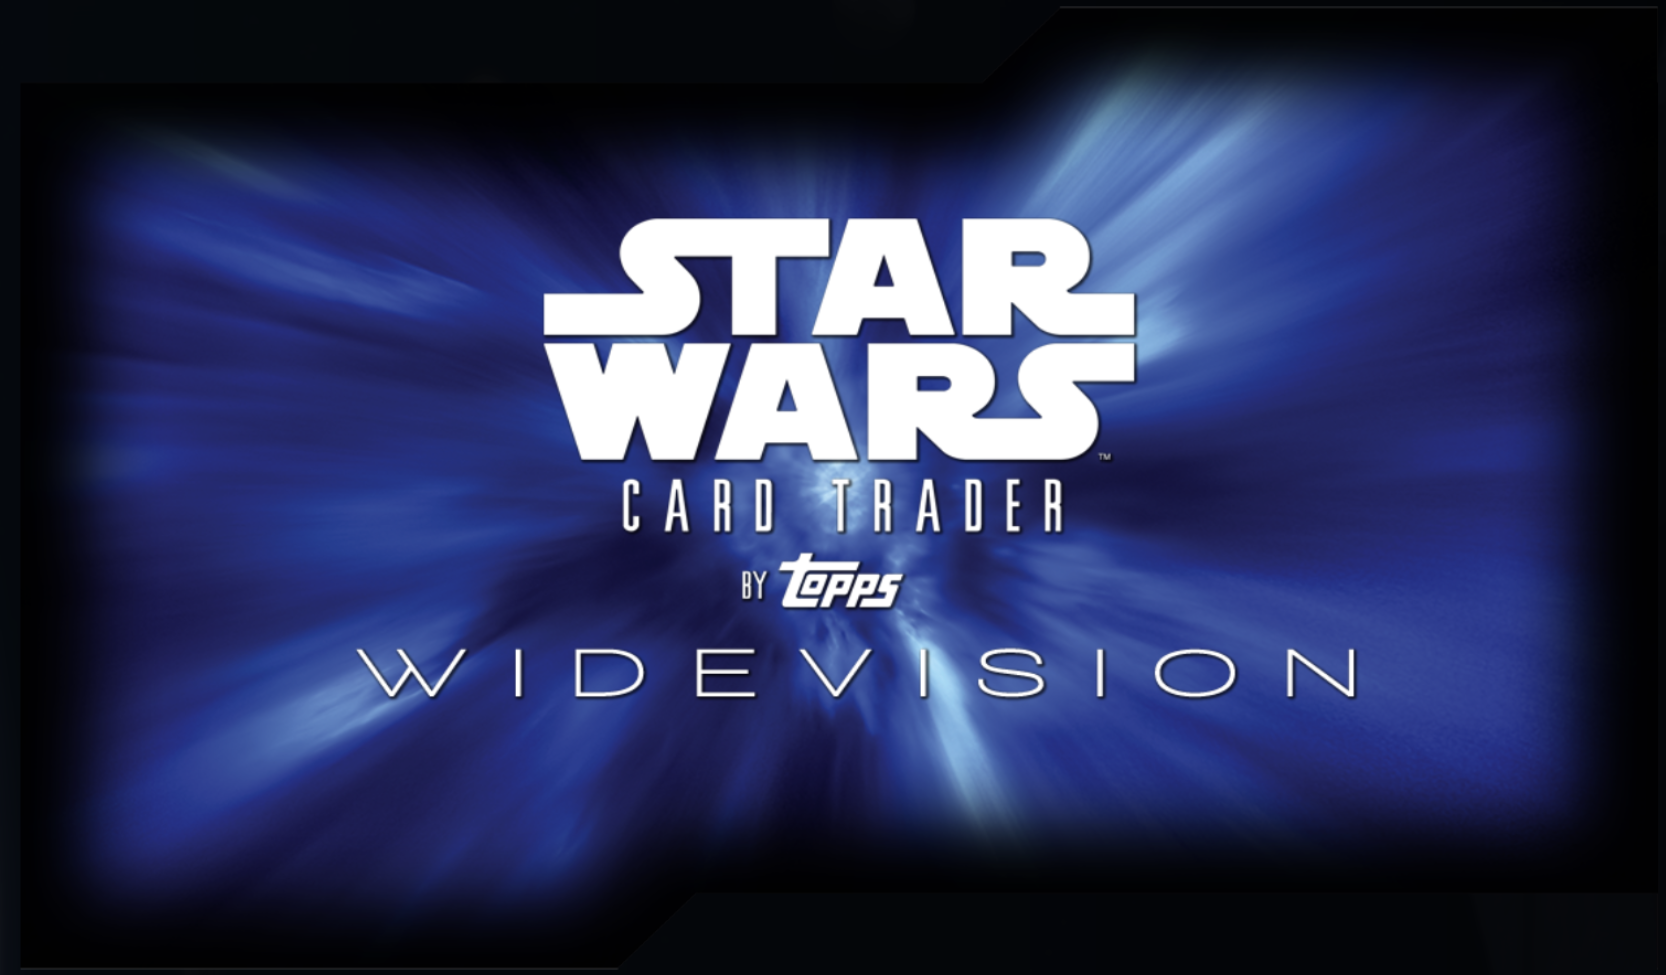 Topps Star Wars Digital Card Trader 6 Card Blue Action Accents 1 Insert Set 